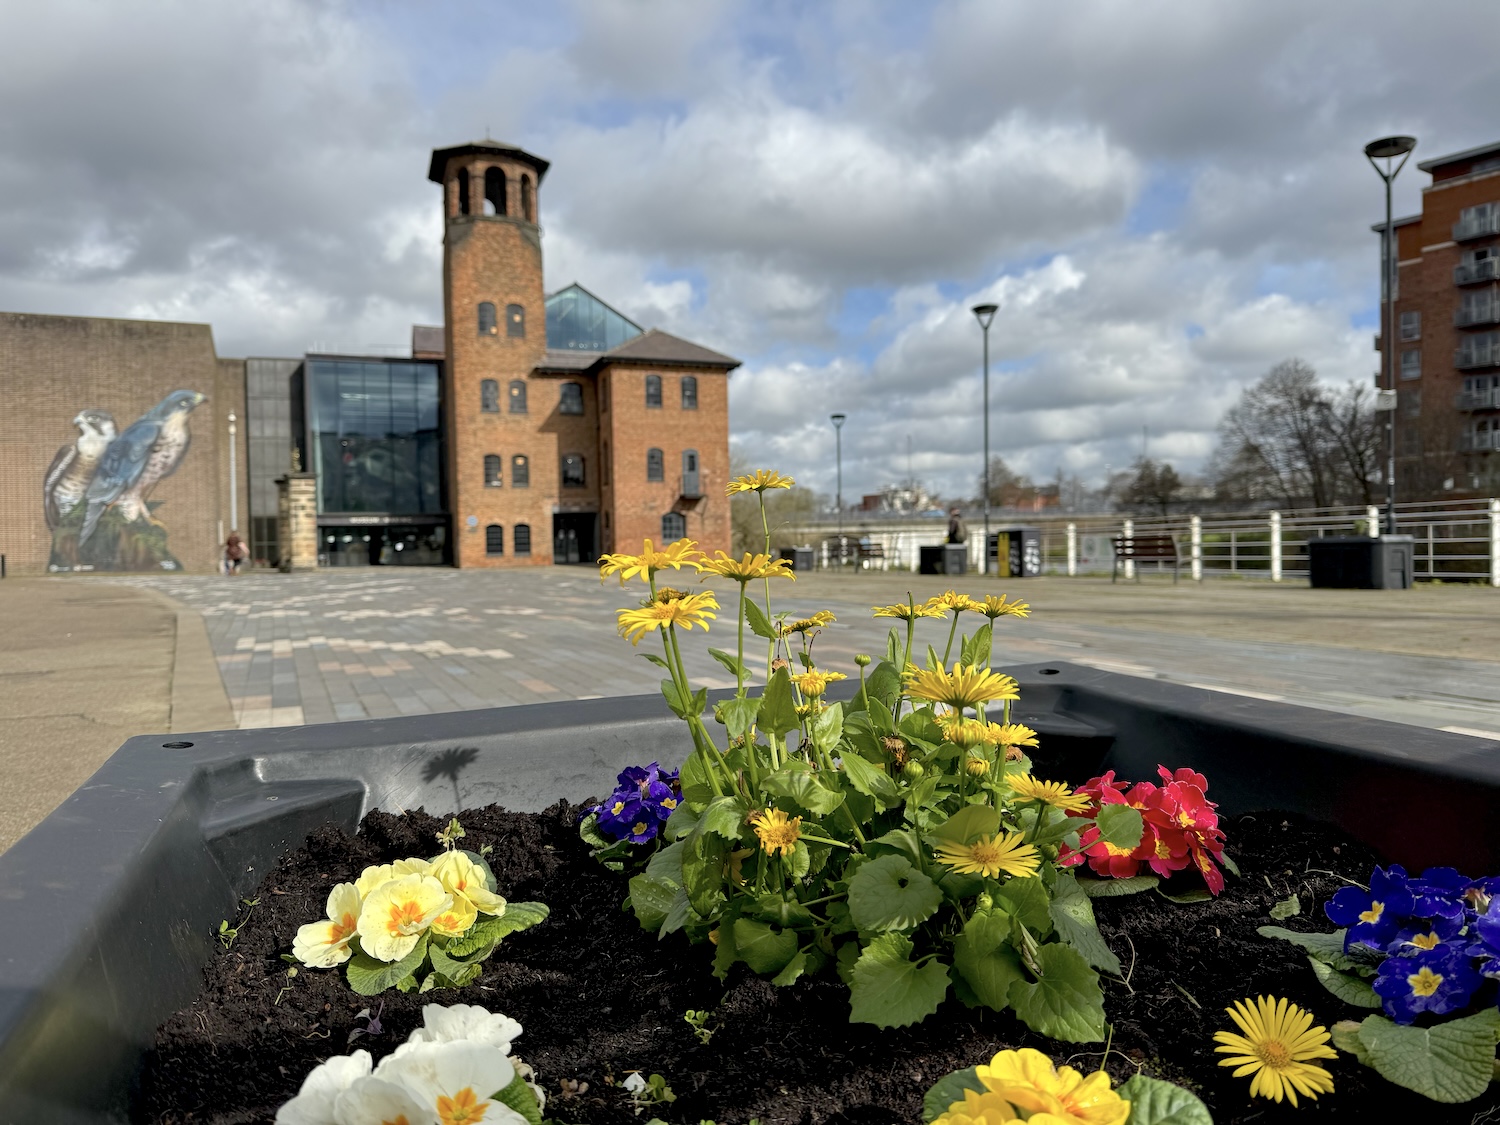 A view with the front of Derby's Silk Mill, home of the Museum of Making, in the background, gthe foreground composed of a colourful array of spring flowers.